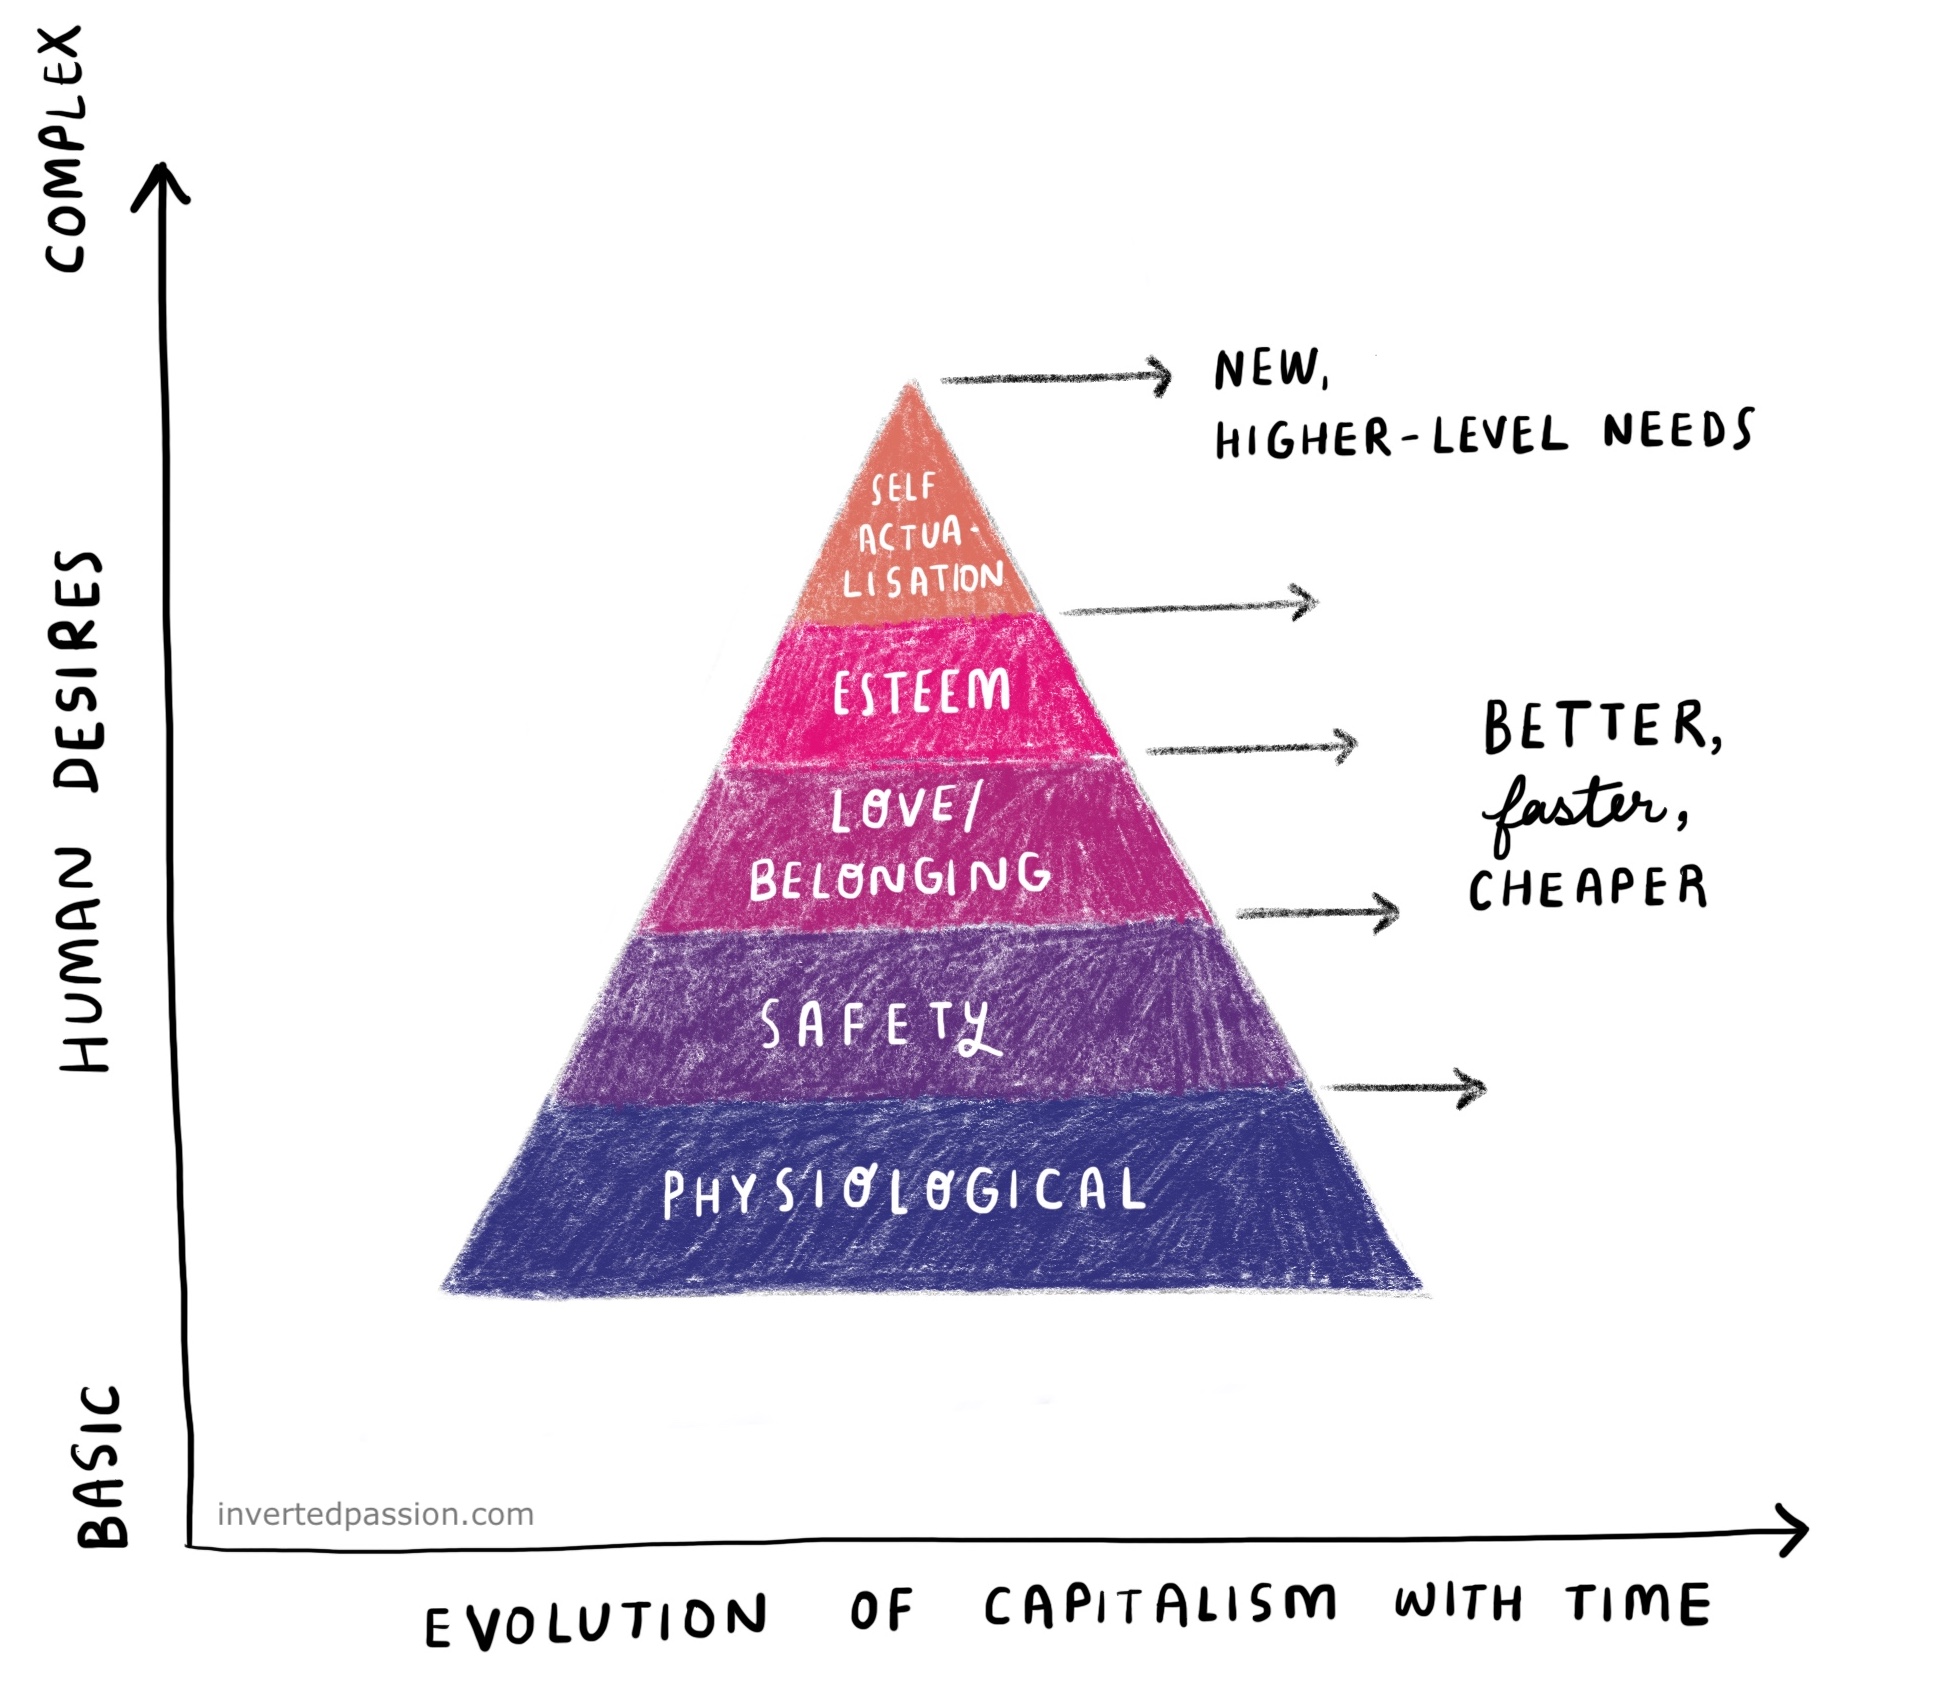 Capitalism is based on a hierarchy of desires